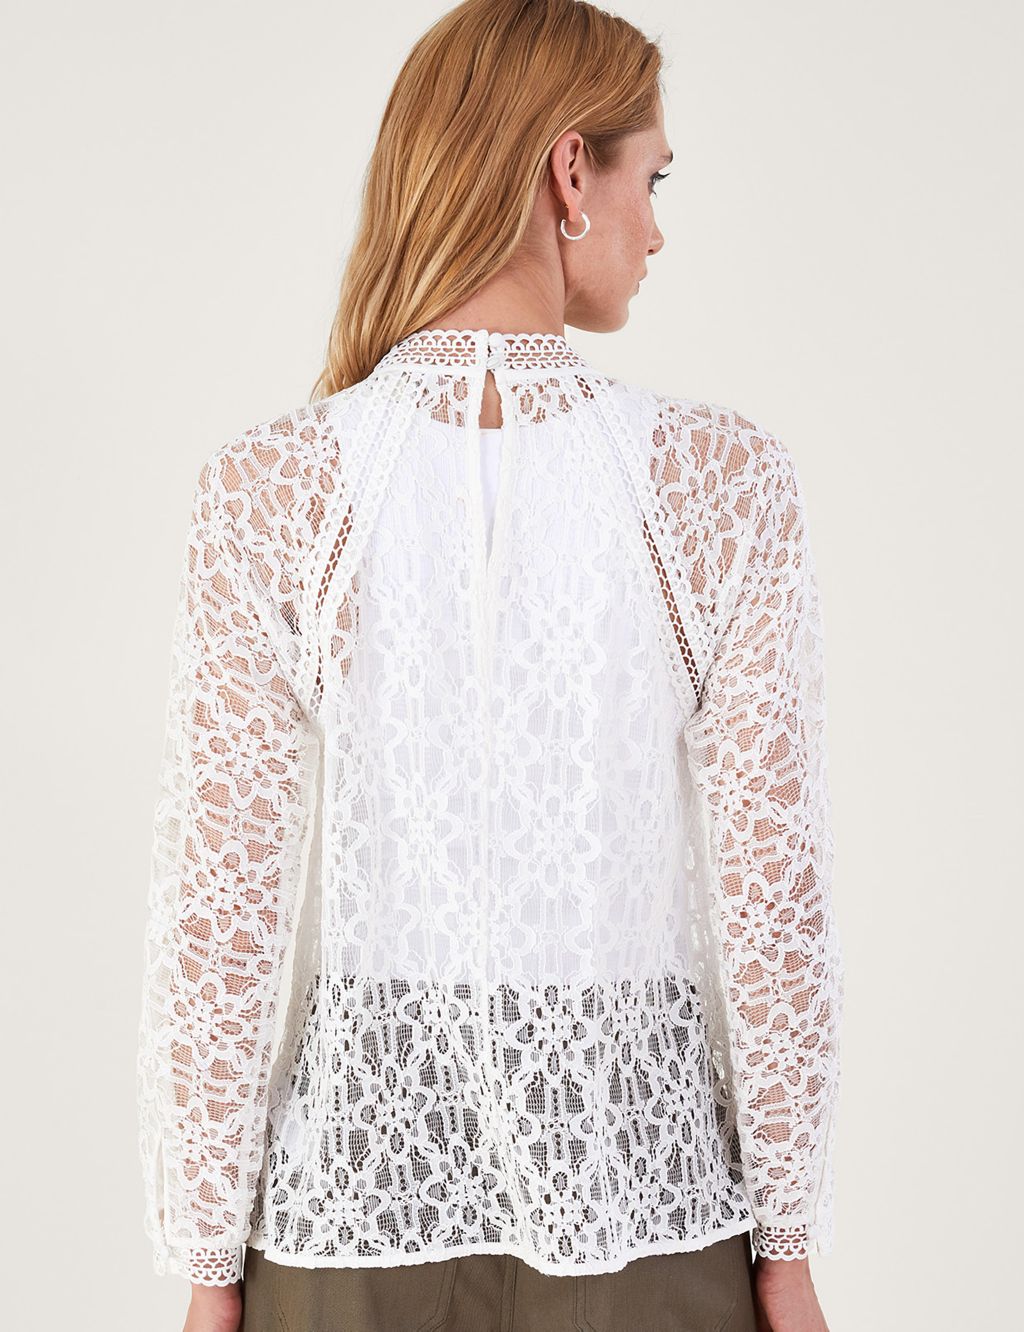 Lace High Neck Cutwork Detail Blouse image 4